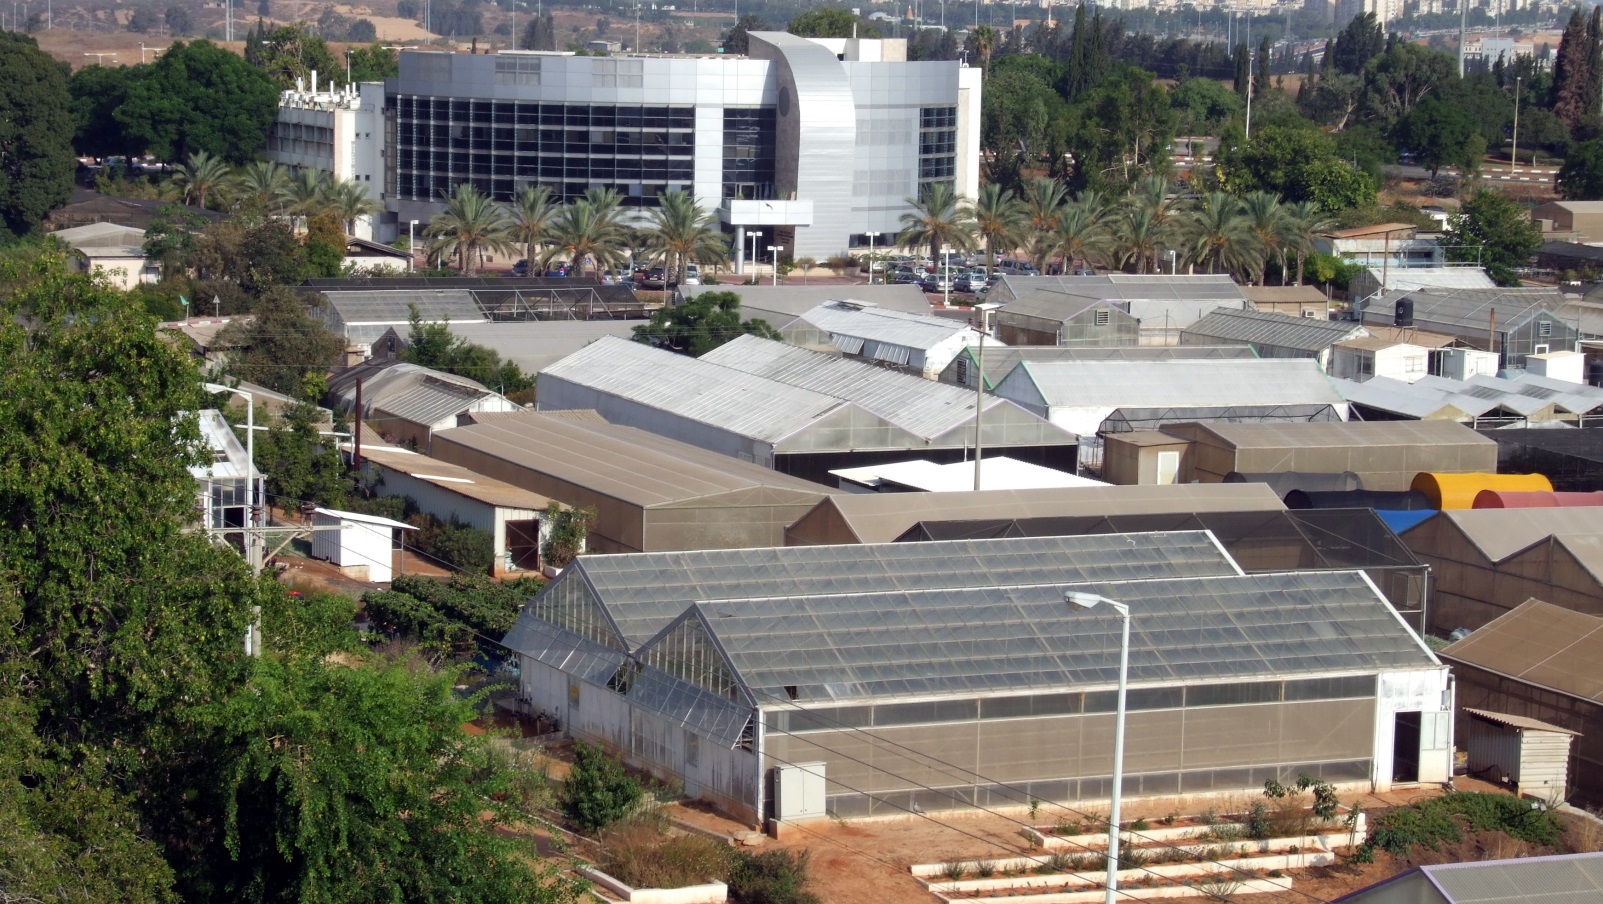 Volcani Center-Agricultural Research Organization in Rishon LeZion. Photo by Yigal Elad